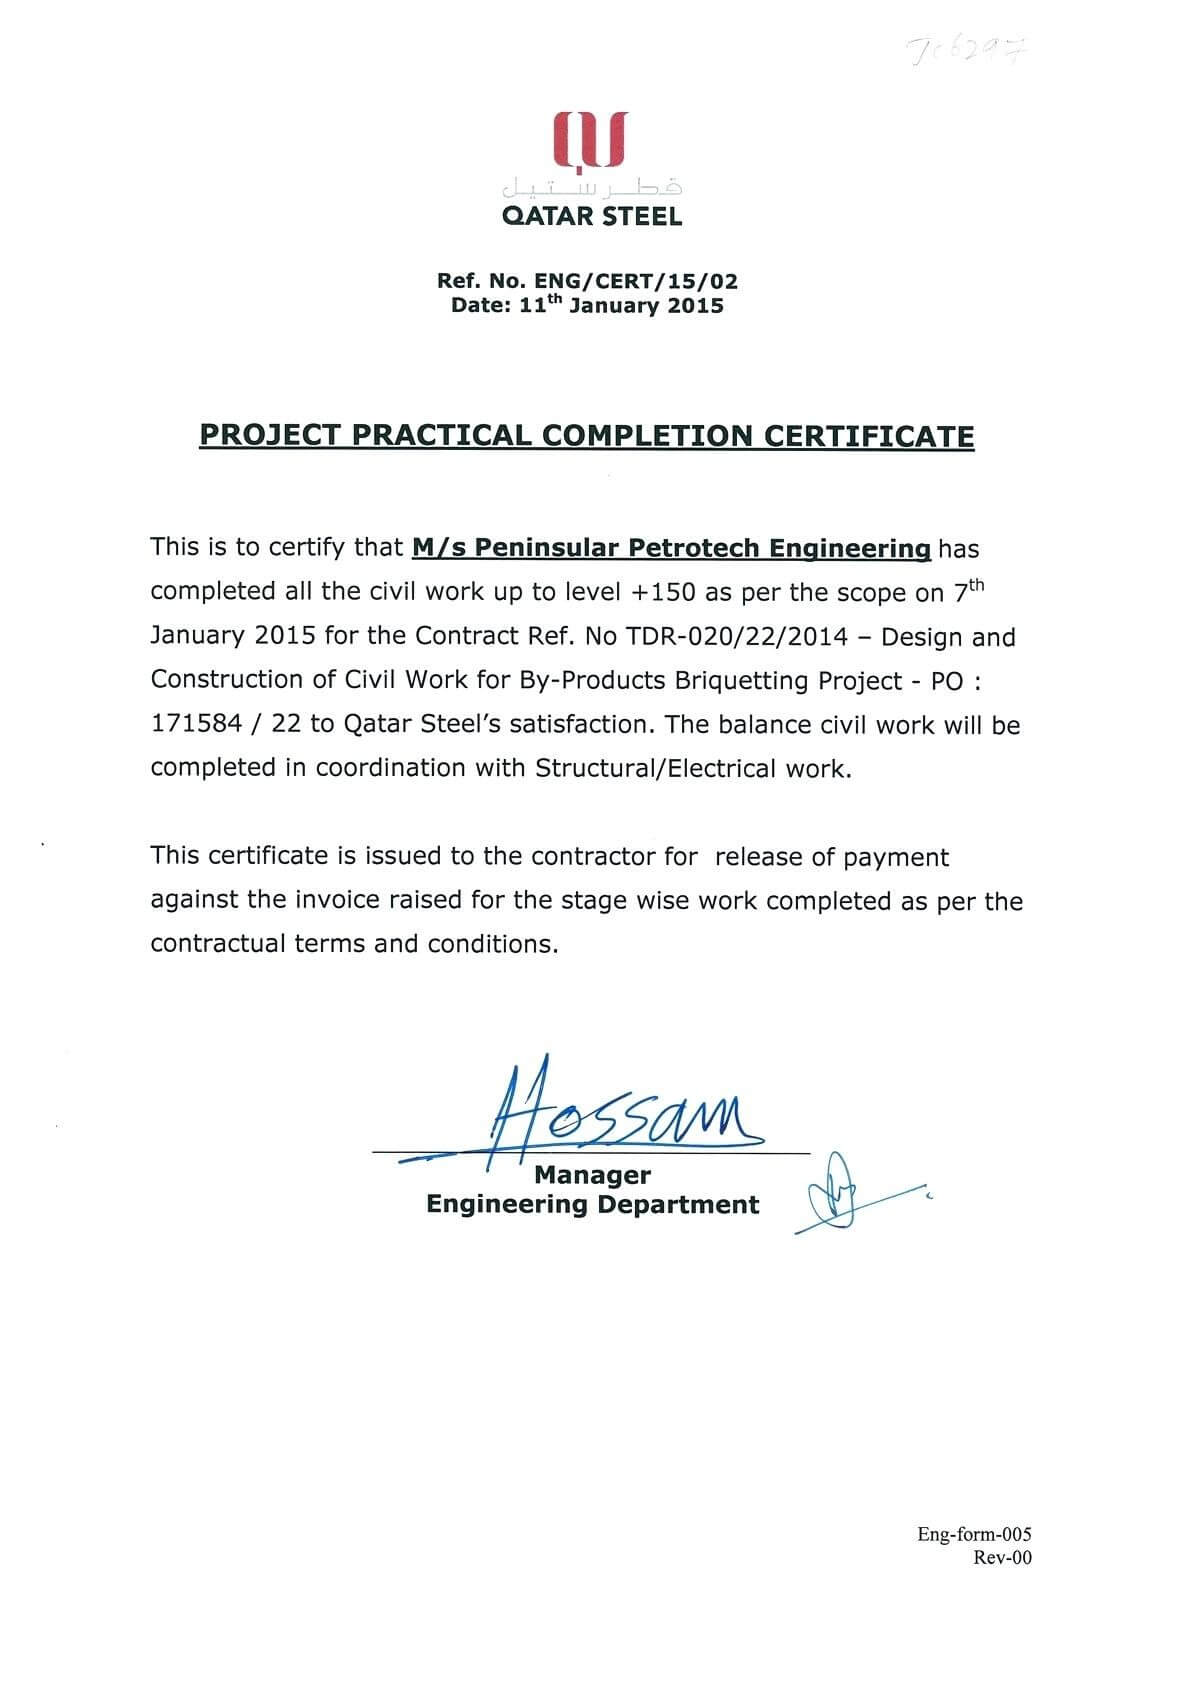 028 Construction Work Order Template Completion Certificate Pertaining To Practical Completion Certificate Template Uk